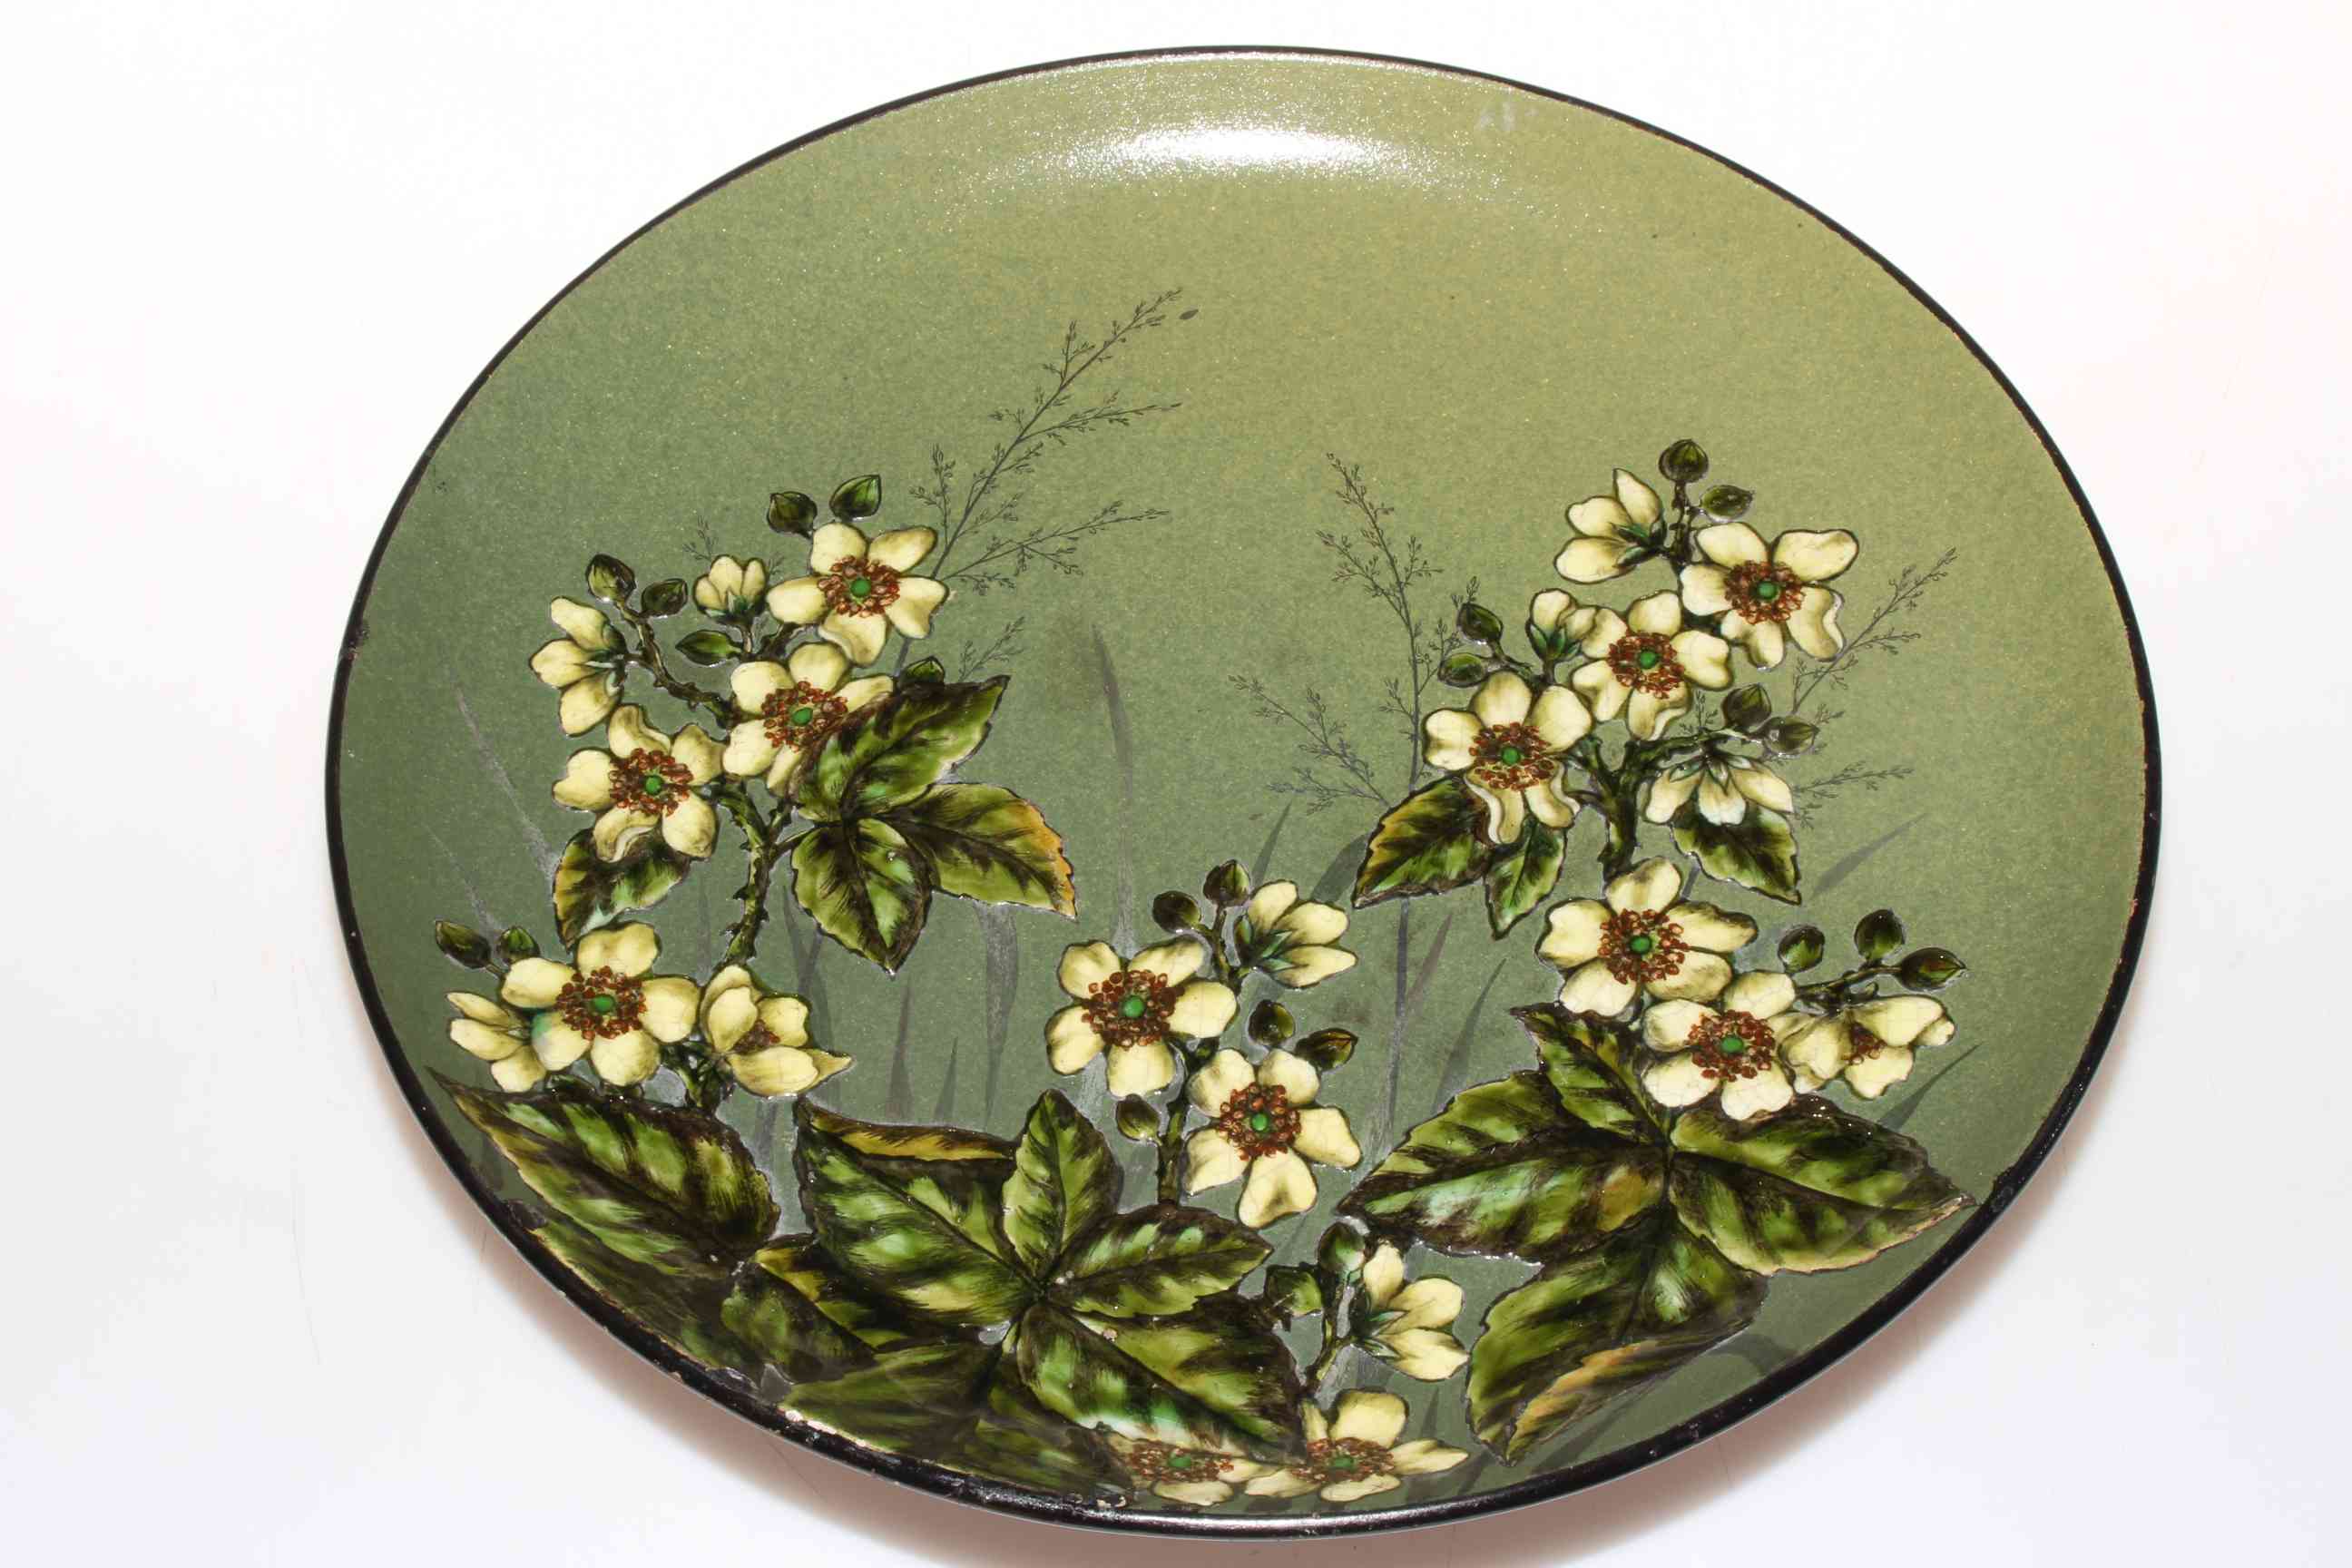 Linthorpe Pottery Henry Tooth circular plaque with floral design, impressed no. 299, 29cm diameter.